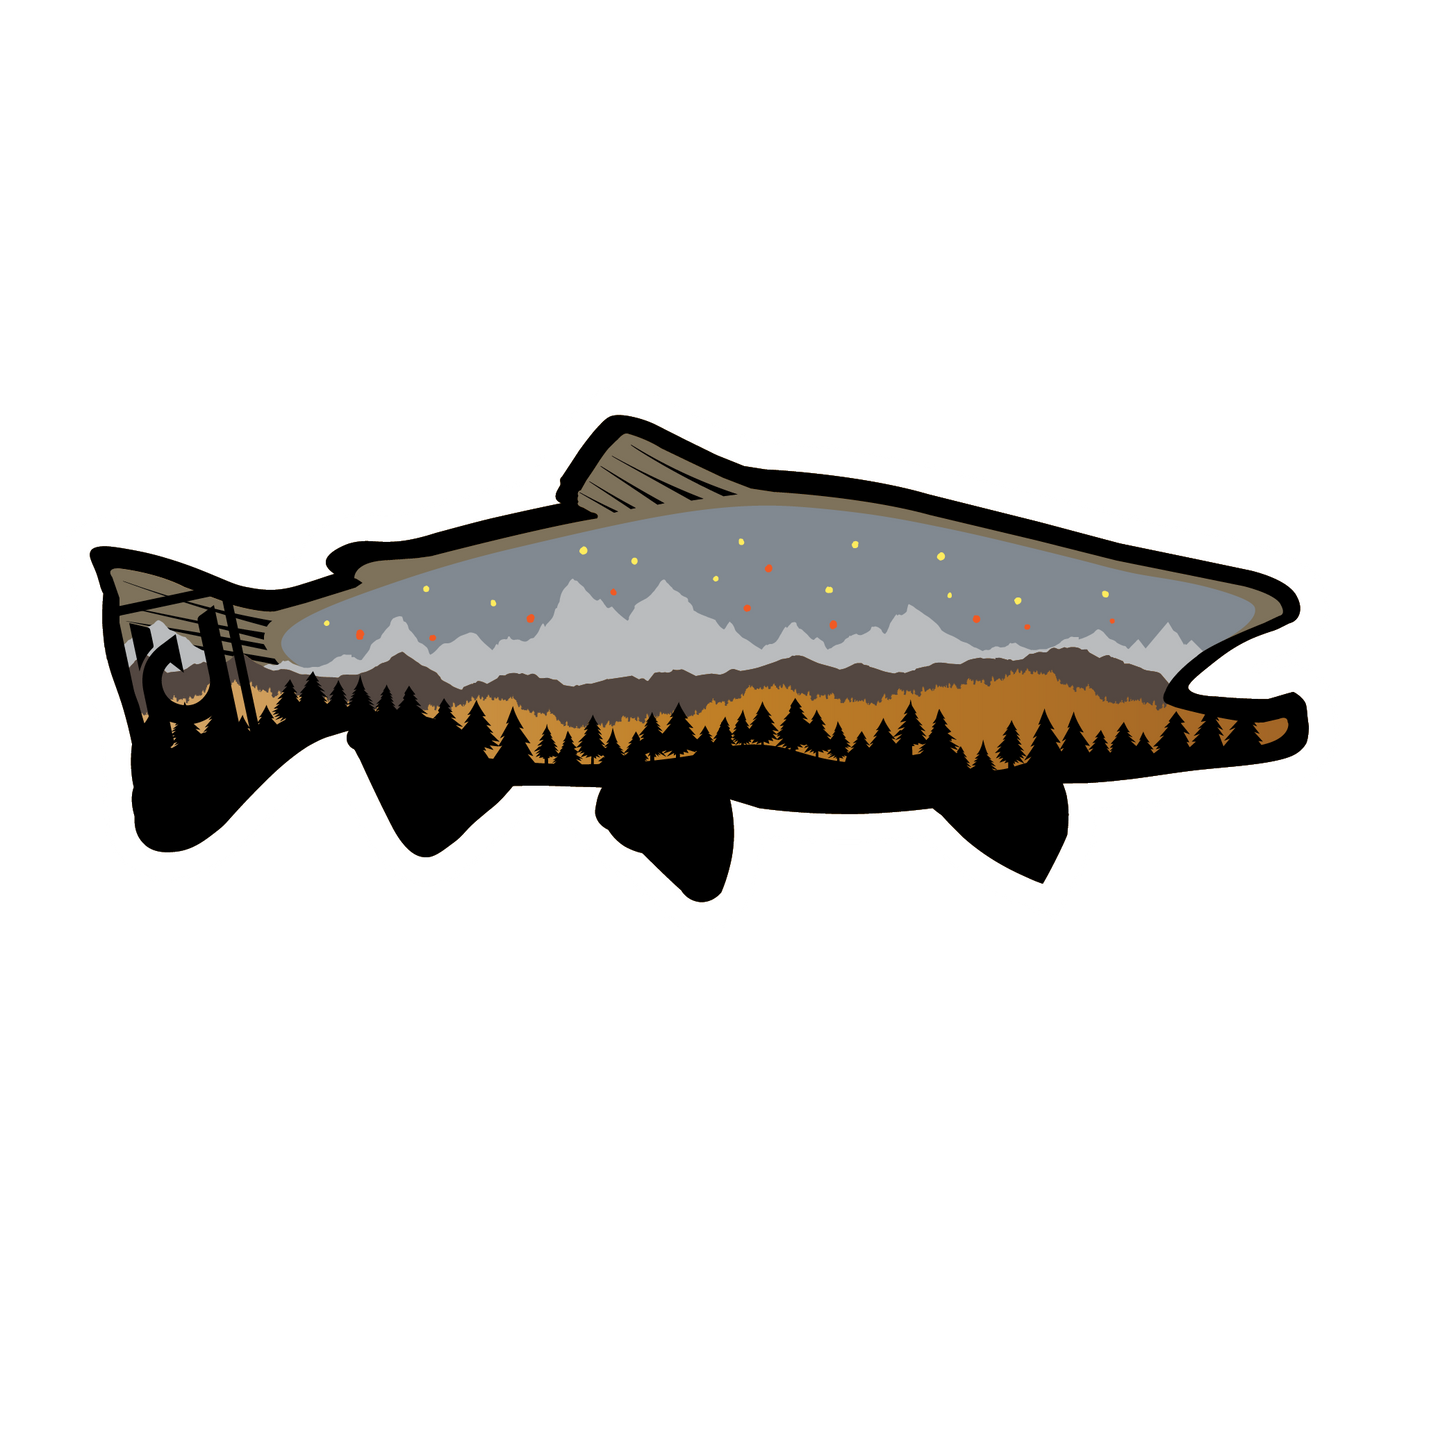 Bull Trout sticker modeled after our wood art! Includes the beautiful features of the Bull Trout along with mountain and pine tree accents. 